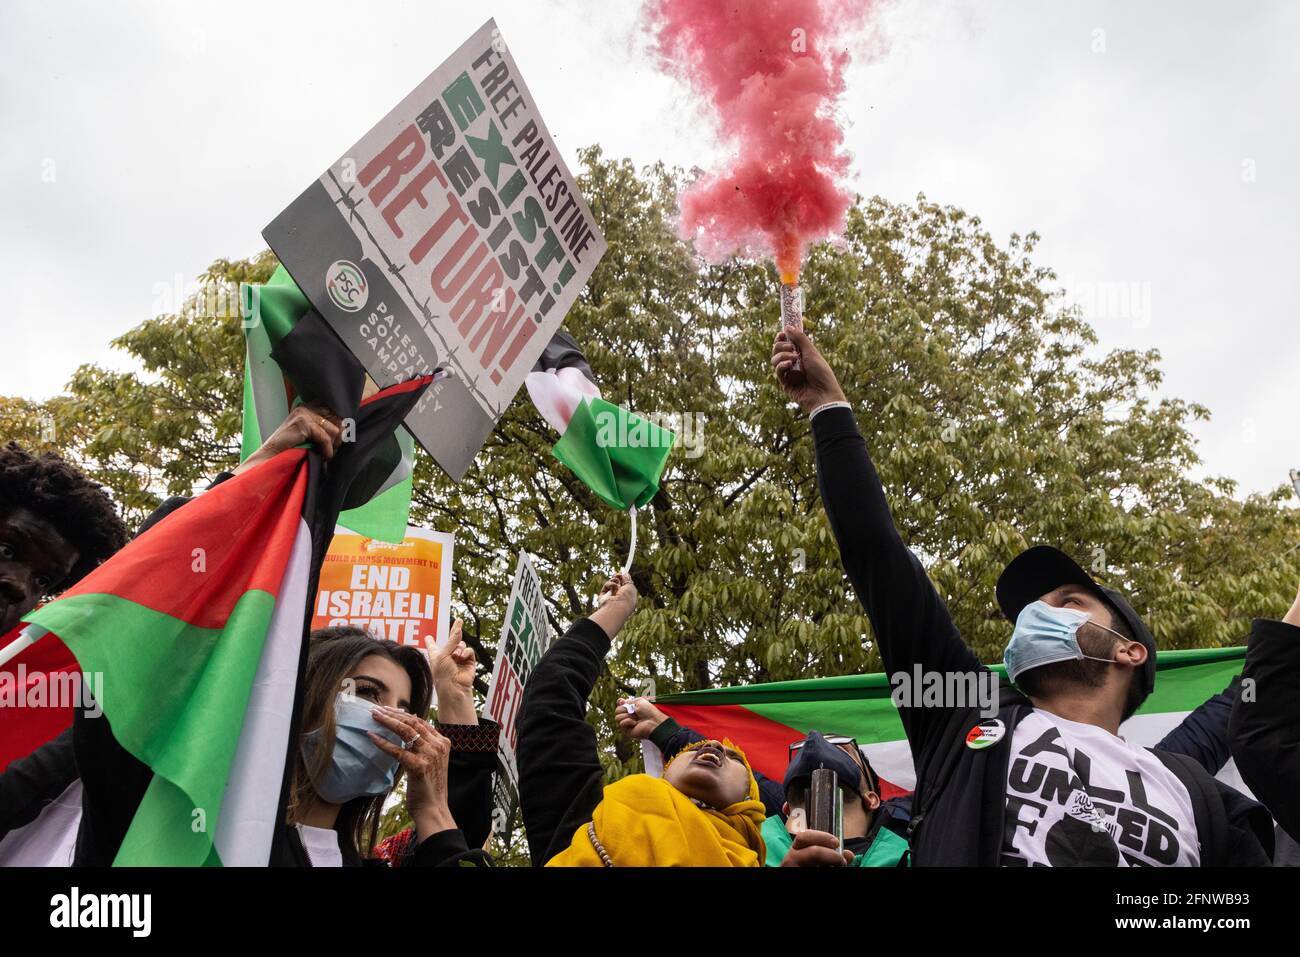 Protesters with flags, placards, and smoke bomb, during 'Free Palestine' solidarity protest, London, 15 May 2021 Stock Photo